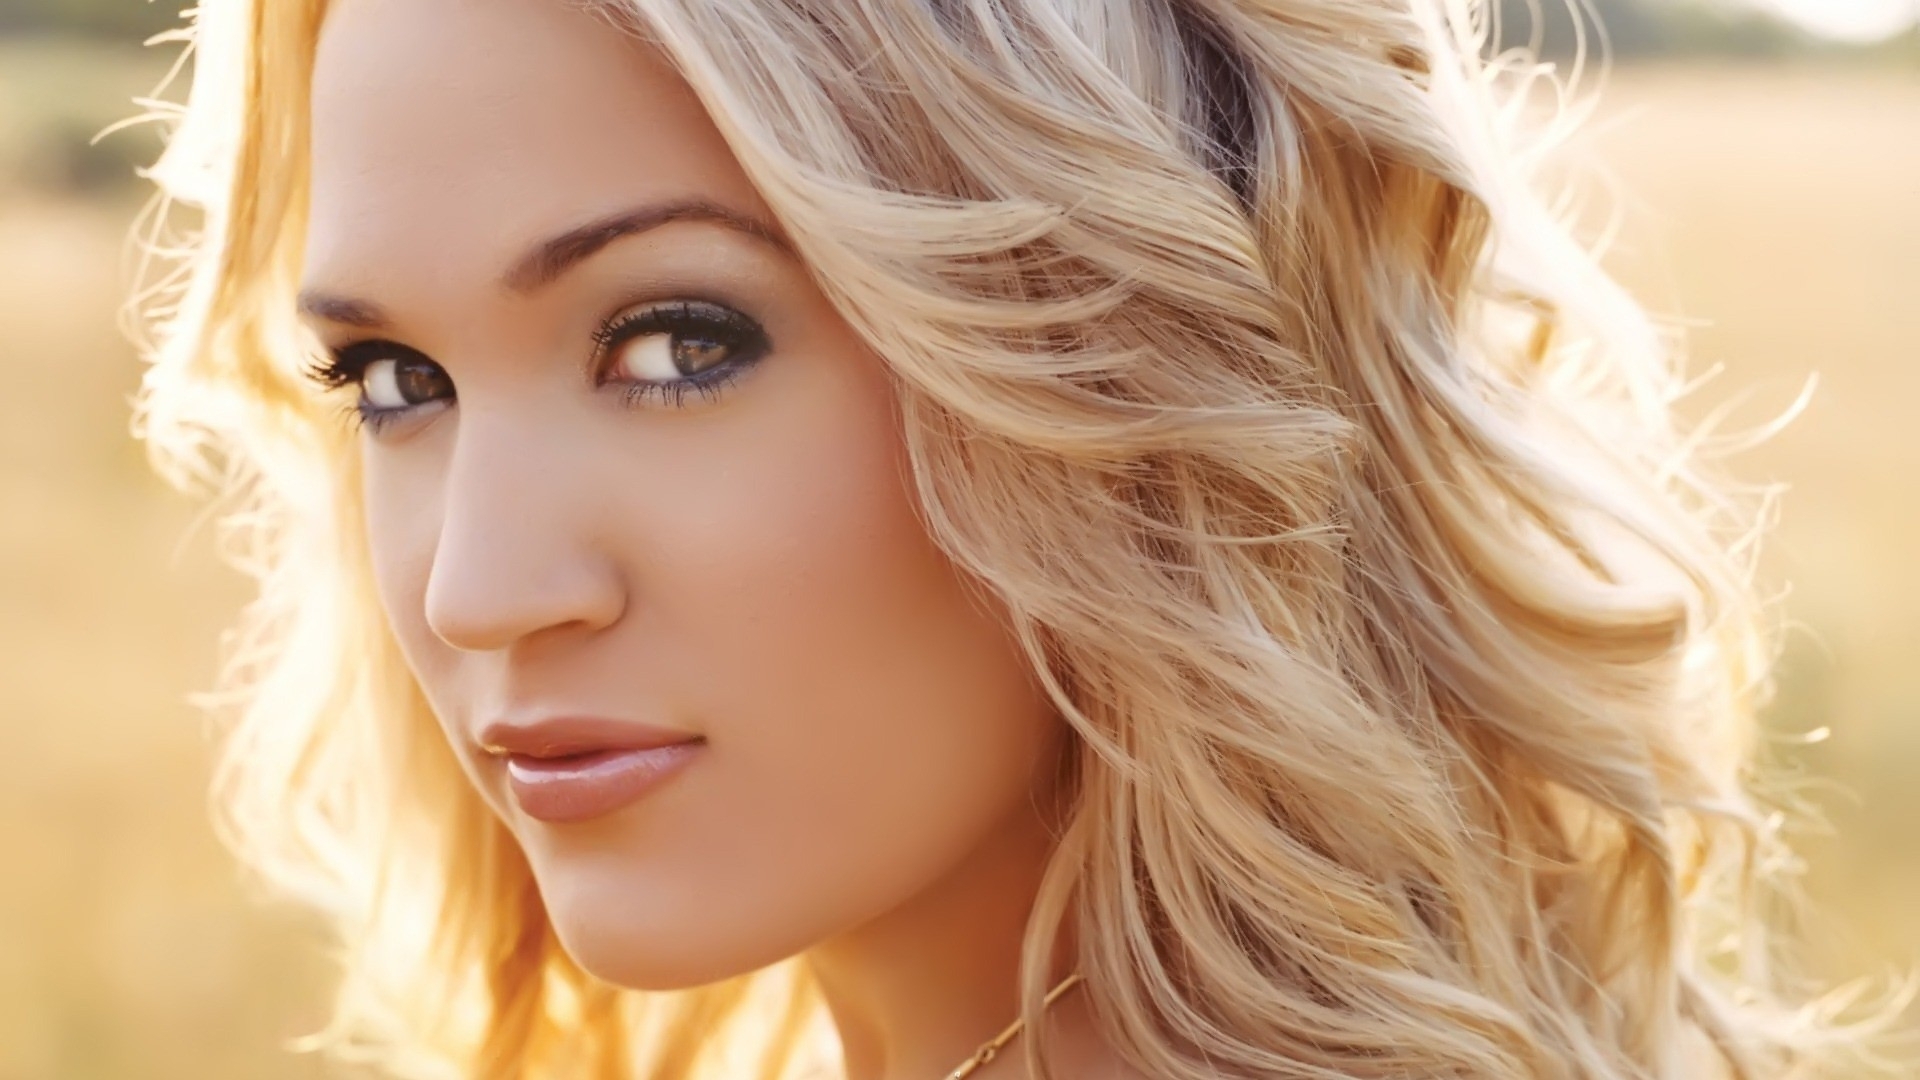 1620x2160 carrie underwood, face, blonde hair 1620x2160 Resolution ...